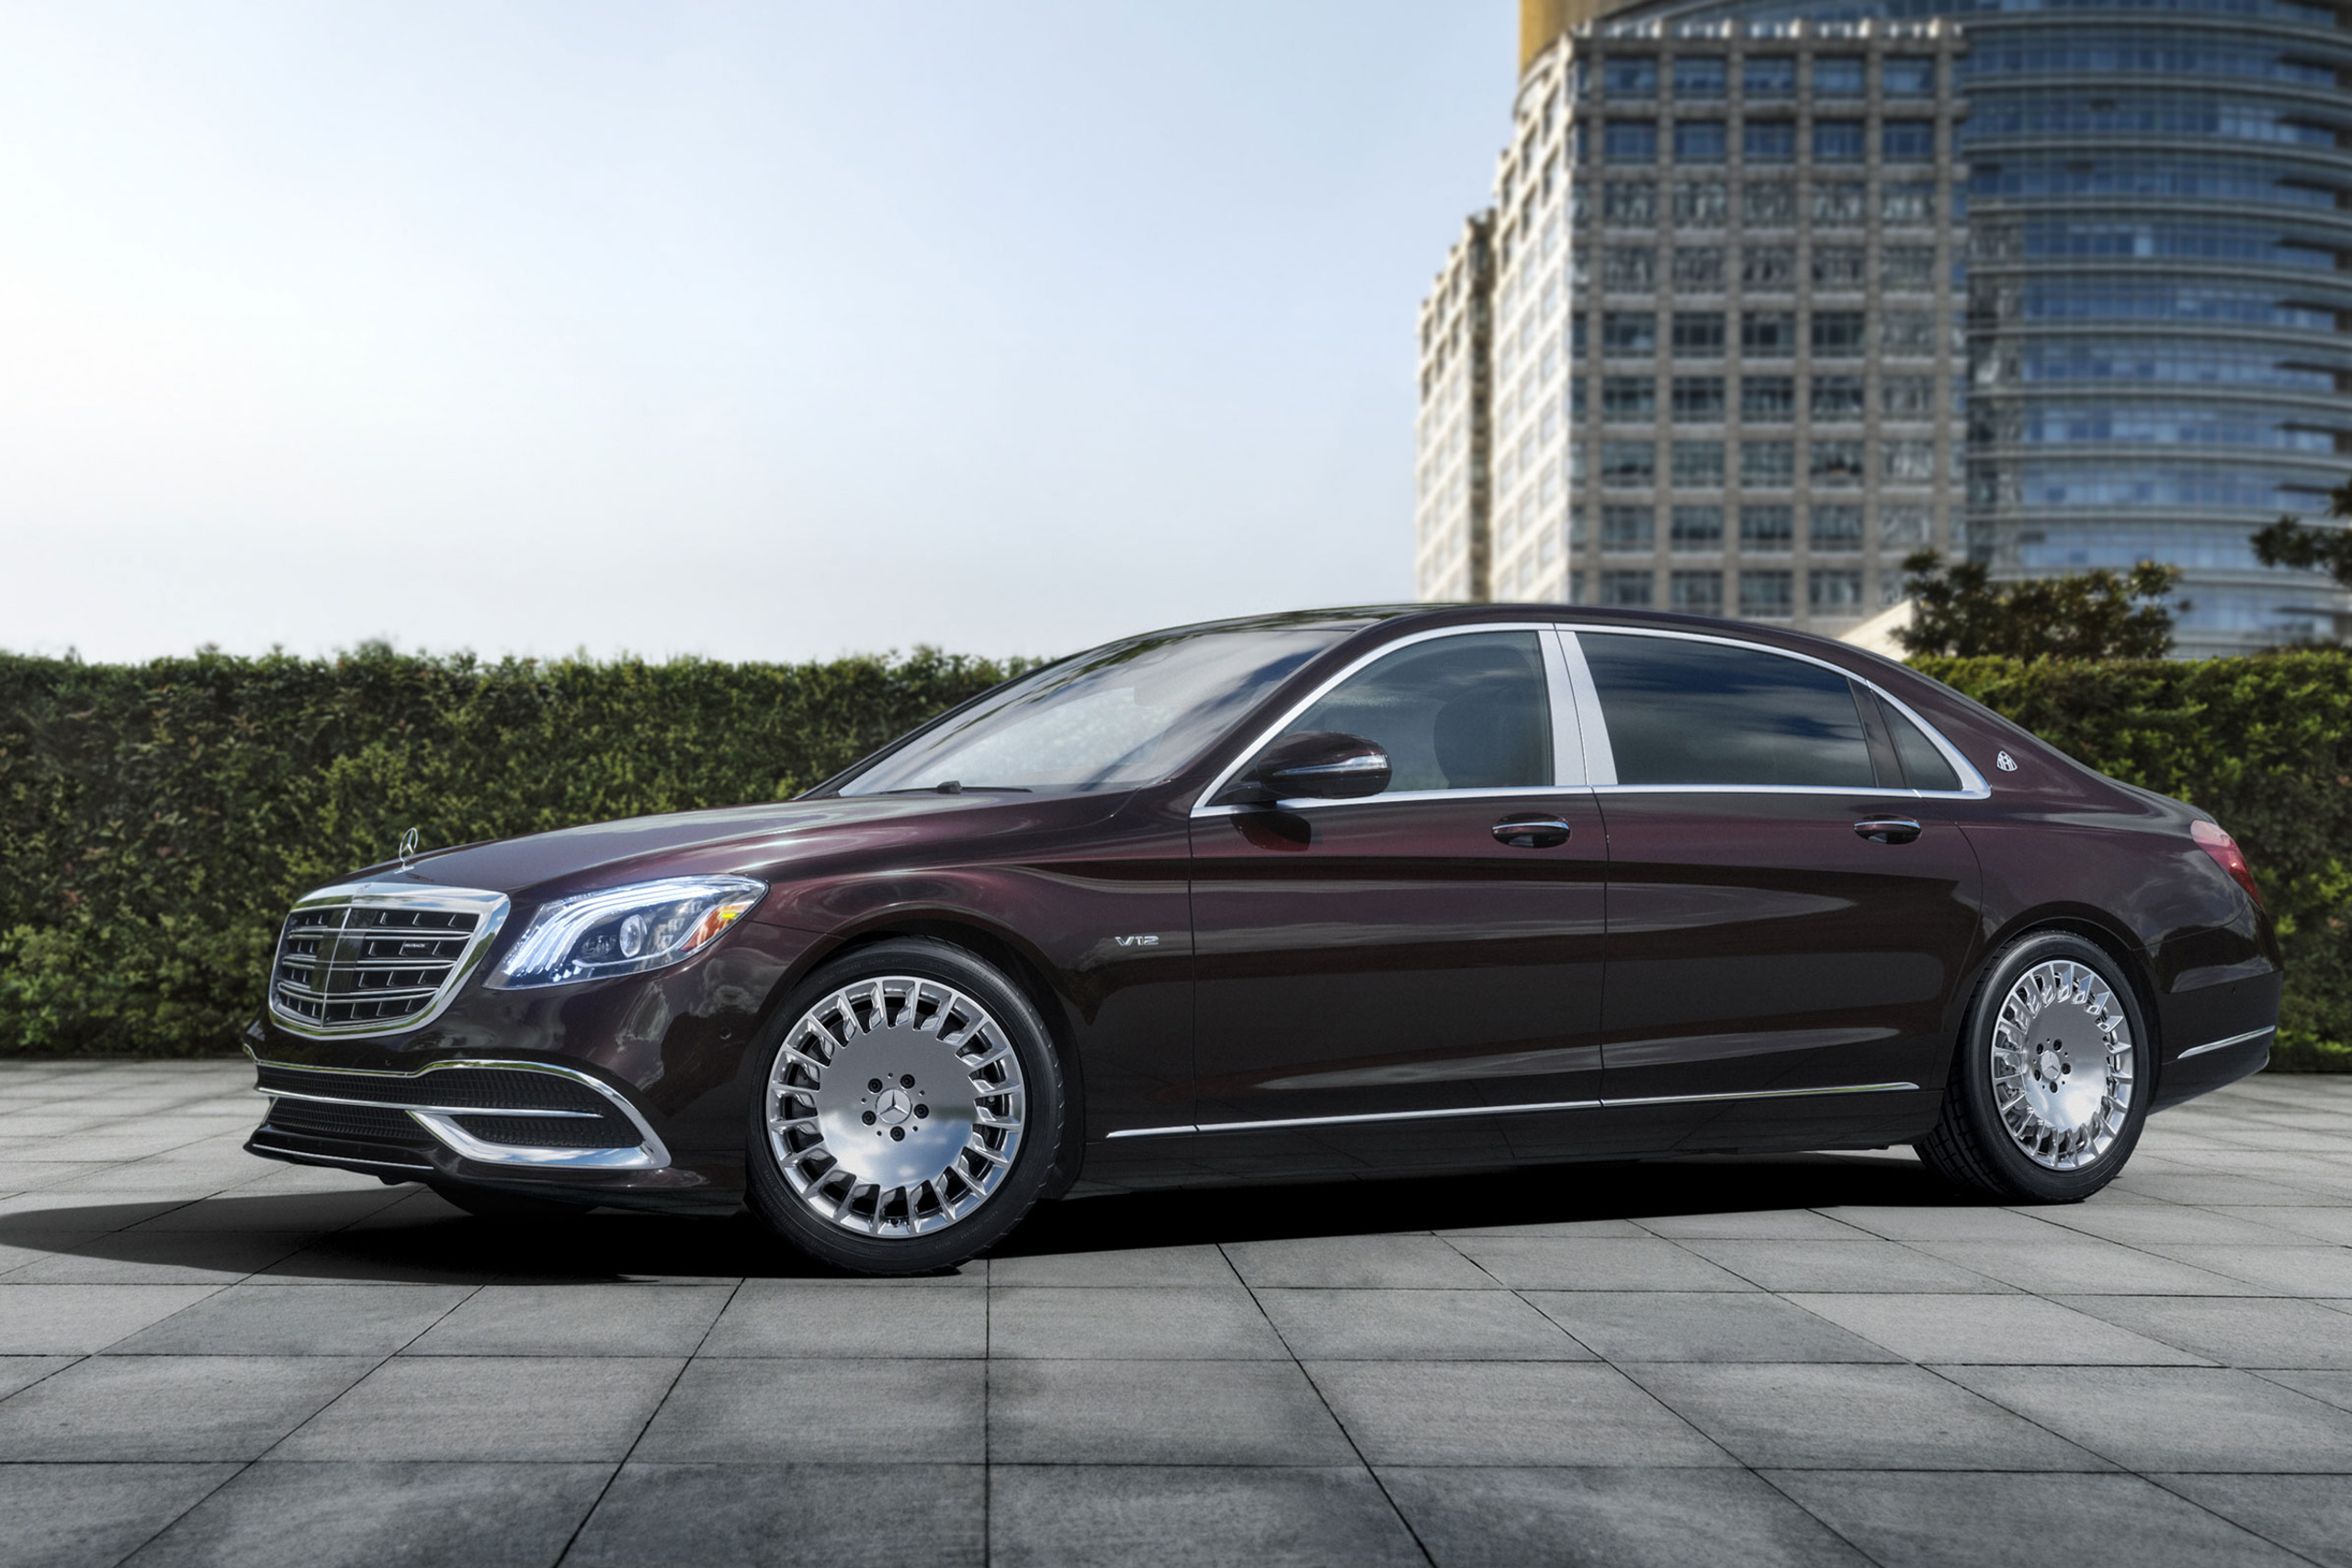 Mercedes benz maybach 600. Мерседес Майбах 2020. Mercedes Benz Maybach s650. Мерседес s222 Maybach. Mercedes Maybach s650 2020.